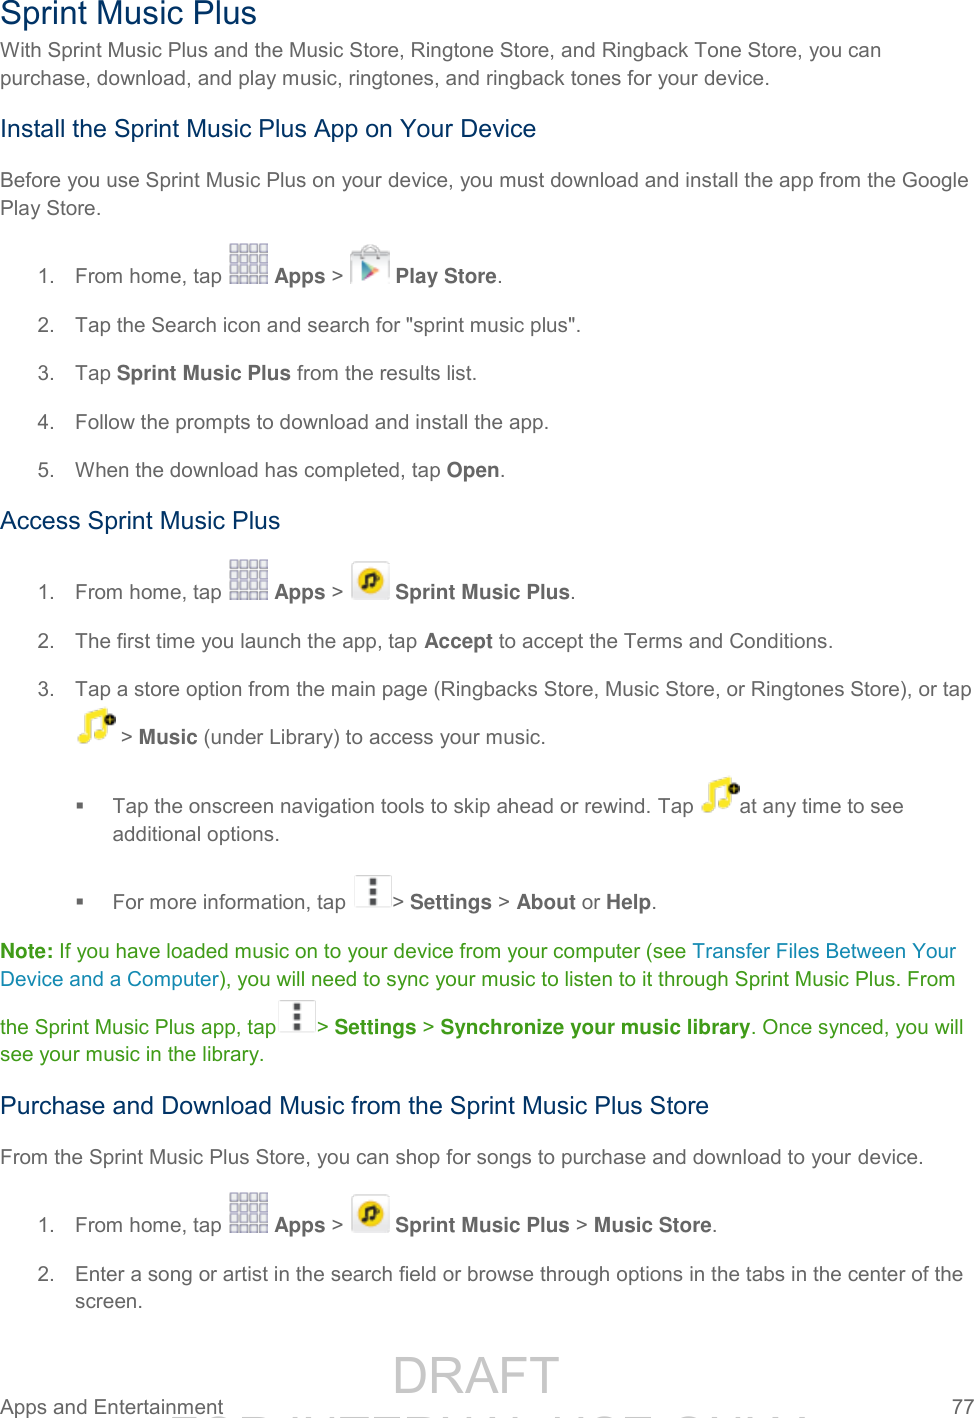                 DRAFT FOR INTERNAL USE ONLY Apps and Entertainment  77   Sprint Music Plus With Sprint Music Plus and the Music Store, Ringtone Store, and Ringback Tone Store, you can purchase, download, and play music, ringtones, and ringback tones for your device.  Install the Sprint Music Plus App on Your Device Before you use Sprint Music Plus on your device, you must download and install the app from the Google Play Store. 1.  From home, tap   Apps &gt;   Play Store. 2.  Tap the Search icon and search for &quot;sprint music plus&quot;. 3.  Tap Sprint Music Plus from the results list. 4.  Follow the prompts to download and install the app. 5.  When the download has completed, tap Open. Access Sprint Music Plus 1.  From home, tap   Apps &gt;   Sprint Music Plus. 2.  The first time you launch the app, tap Accept to accept the Terms and Conditions. 3.  Tap a store option from the main page (Ringbacks Store, Music Store, or Ringtones Store), or tap  &gt; Music (under Library) to access your music.   Tap the onscreen navigation tools to skip ahead or rewind. Tap  at any time to see additional options.    For more information, tap  &gt; Settings &gt; About or Help.  Note: If you have loaded music on to your device from your computer (see Transfer Files Between Your Device and a Computer), you will need to sync your music to listen to it through Sprint Music Plus. From the Sprint Music Plus app, tap &gt; Settings &gt; Synchronize your music library. Once synced, you will see your music in the library. Purchase and Download Music from the Sprint Music Plus Store From the Sprint Music Plus Store, you can shop for songs to purchase and download to your device. 1.  From home, tap   Apps &gt;   Sprint Music Plus &gt; Music Store. 2.  Enter a song or artist in the search field or browse through options in the tabs in the center of the screen. 